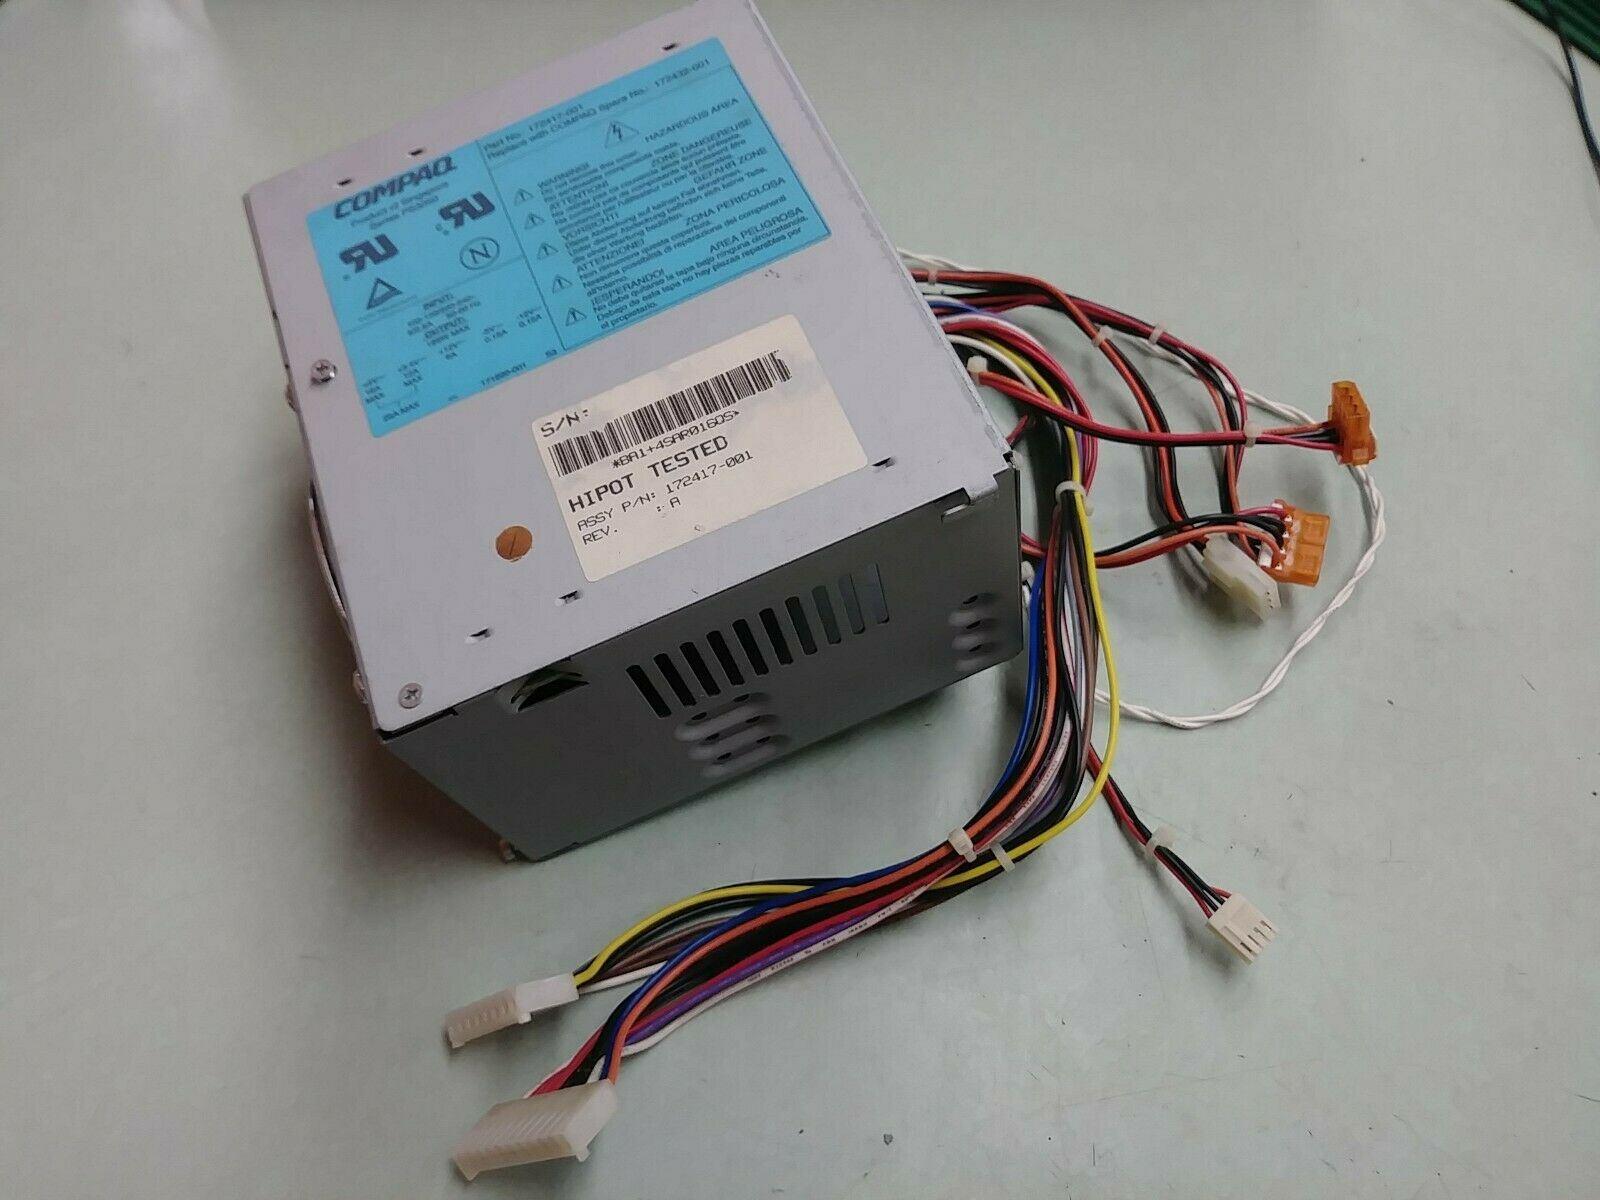 172417 001 PS3050 172432 001 power supply 185 watts no longer supplied